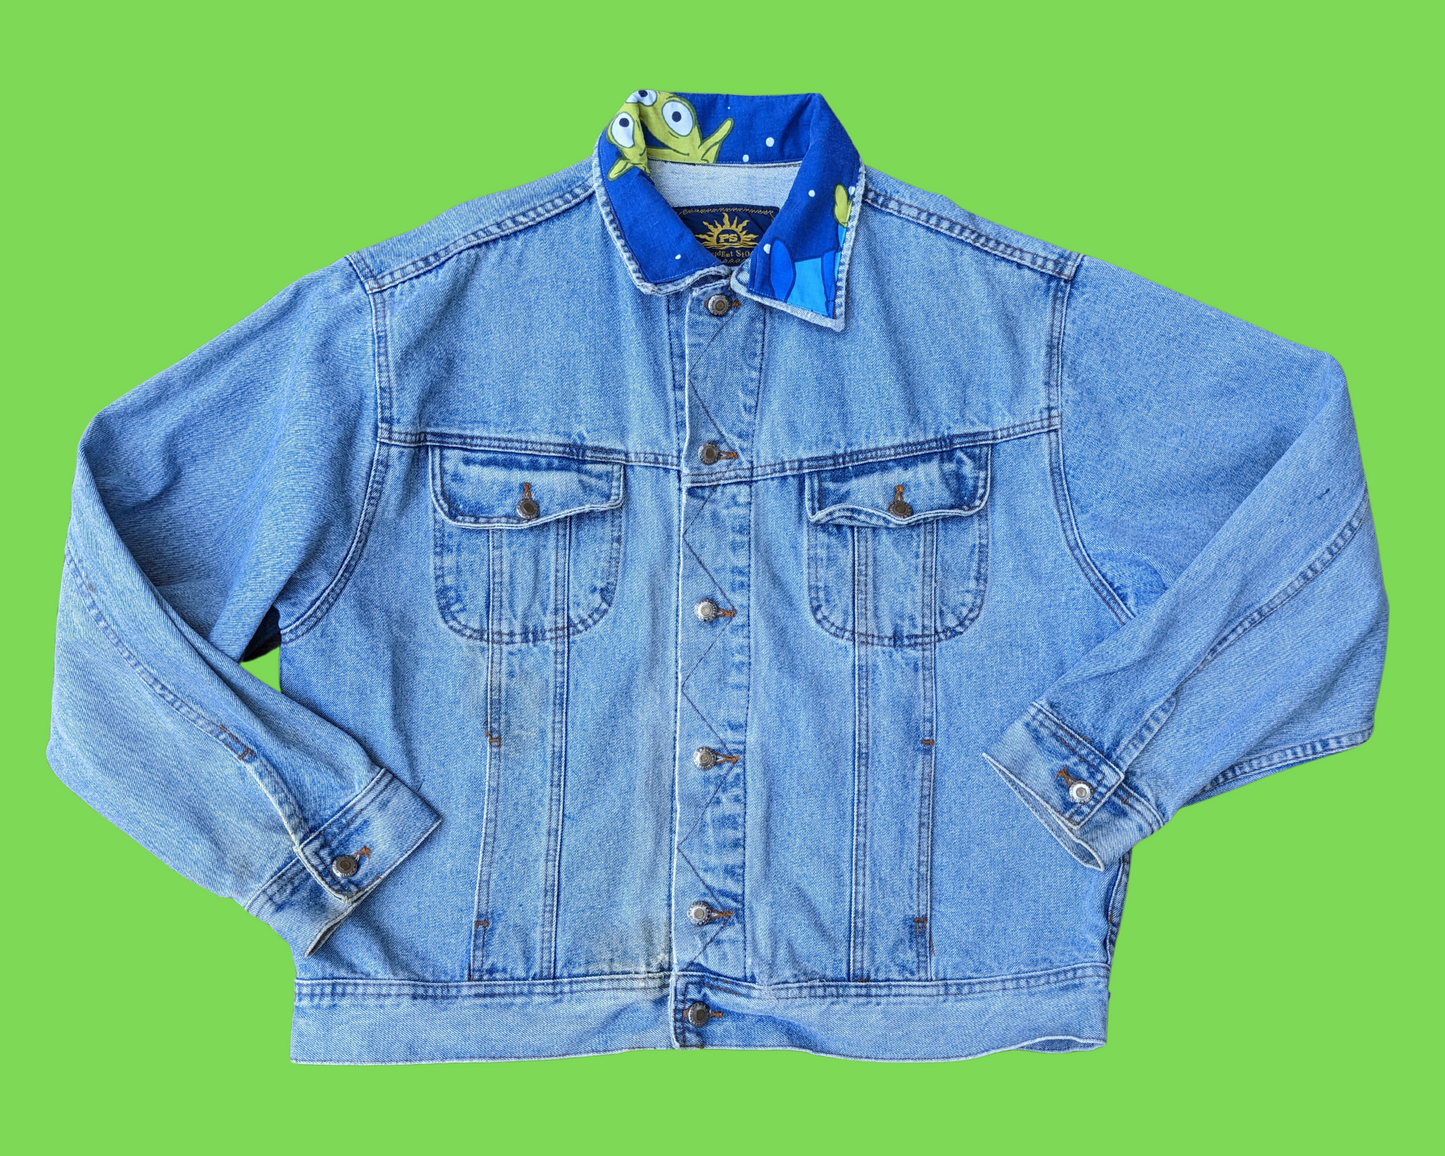 Handmade, Upcycled Cotton Denim Jacket with Toy Story's Little Green Men Bedsheet Fits Like A Size XL